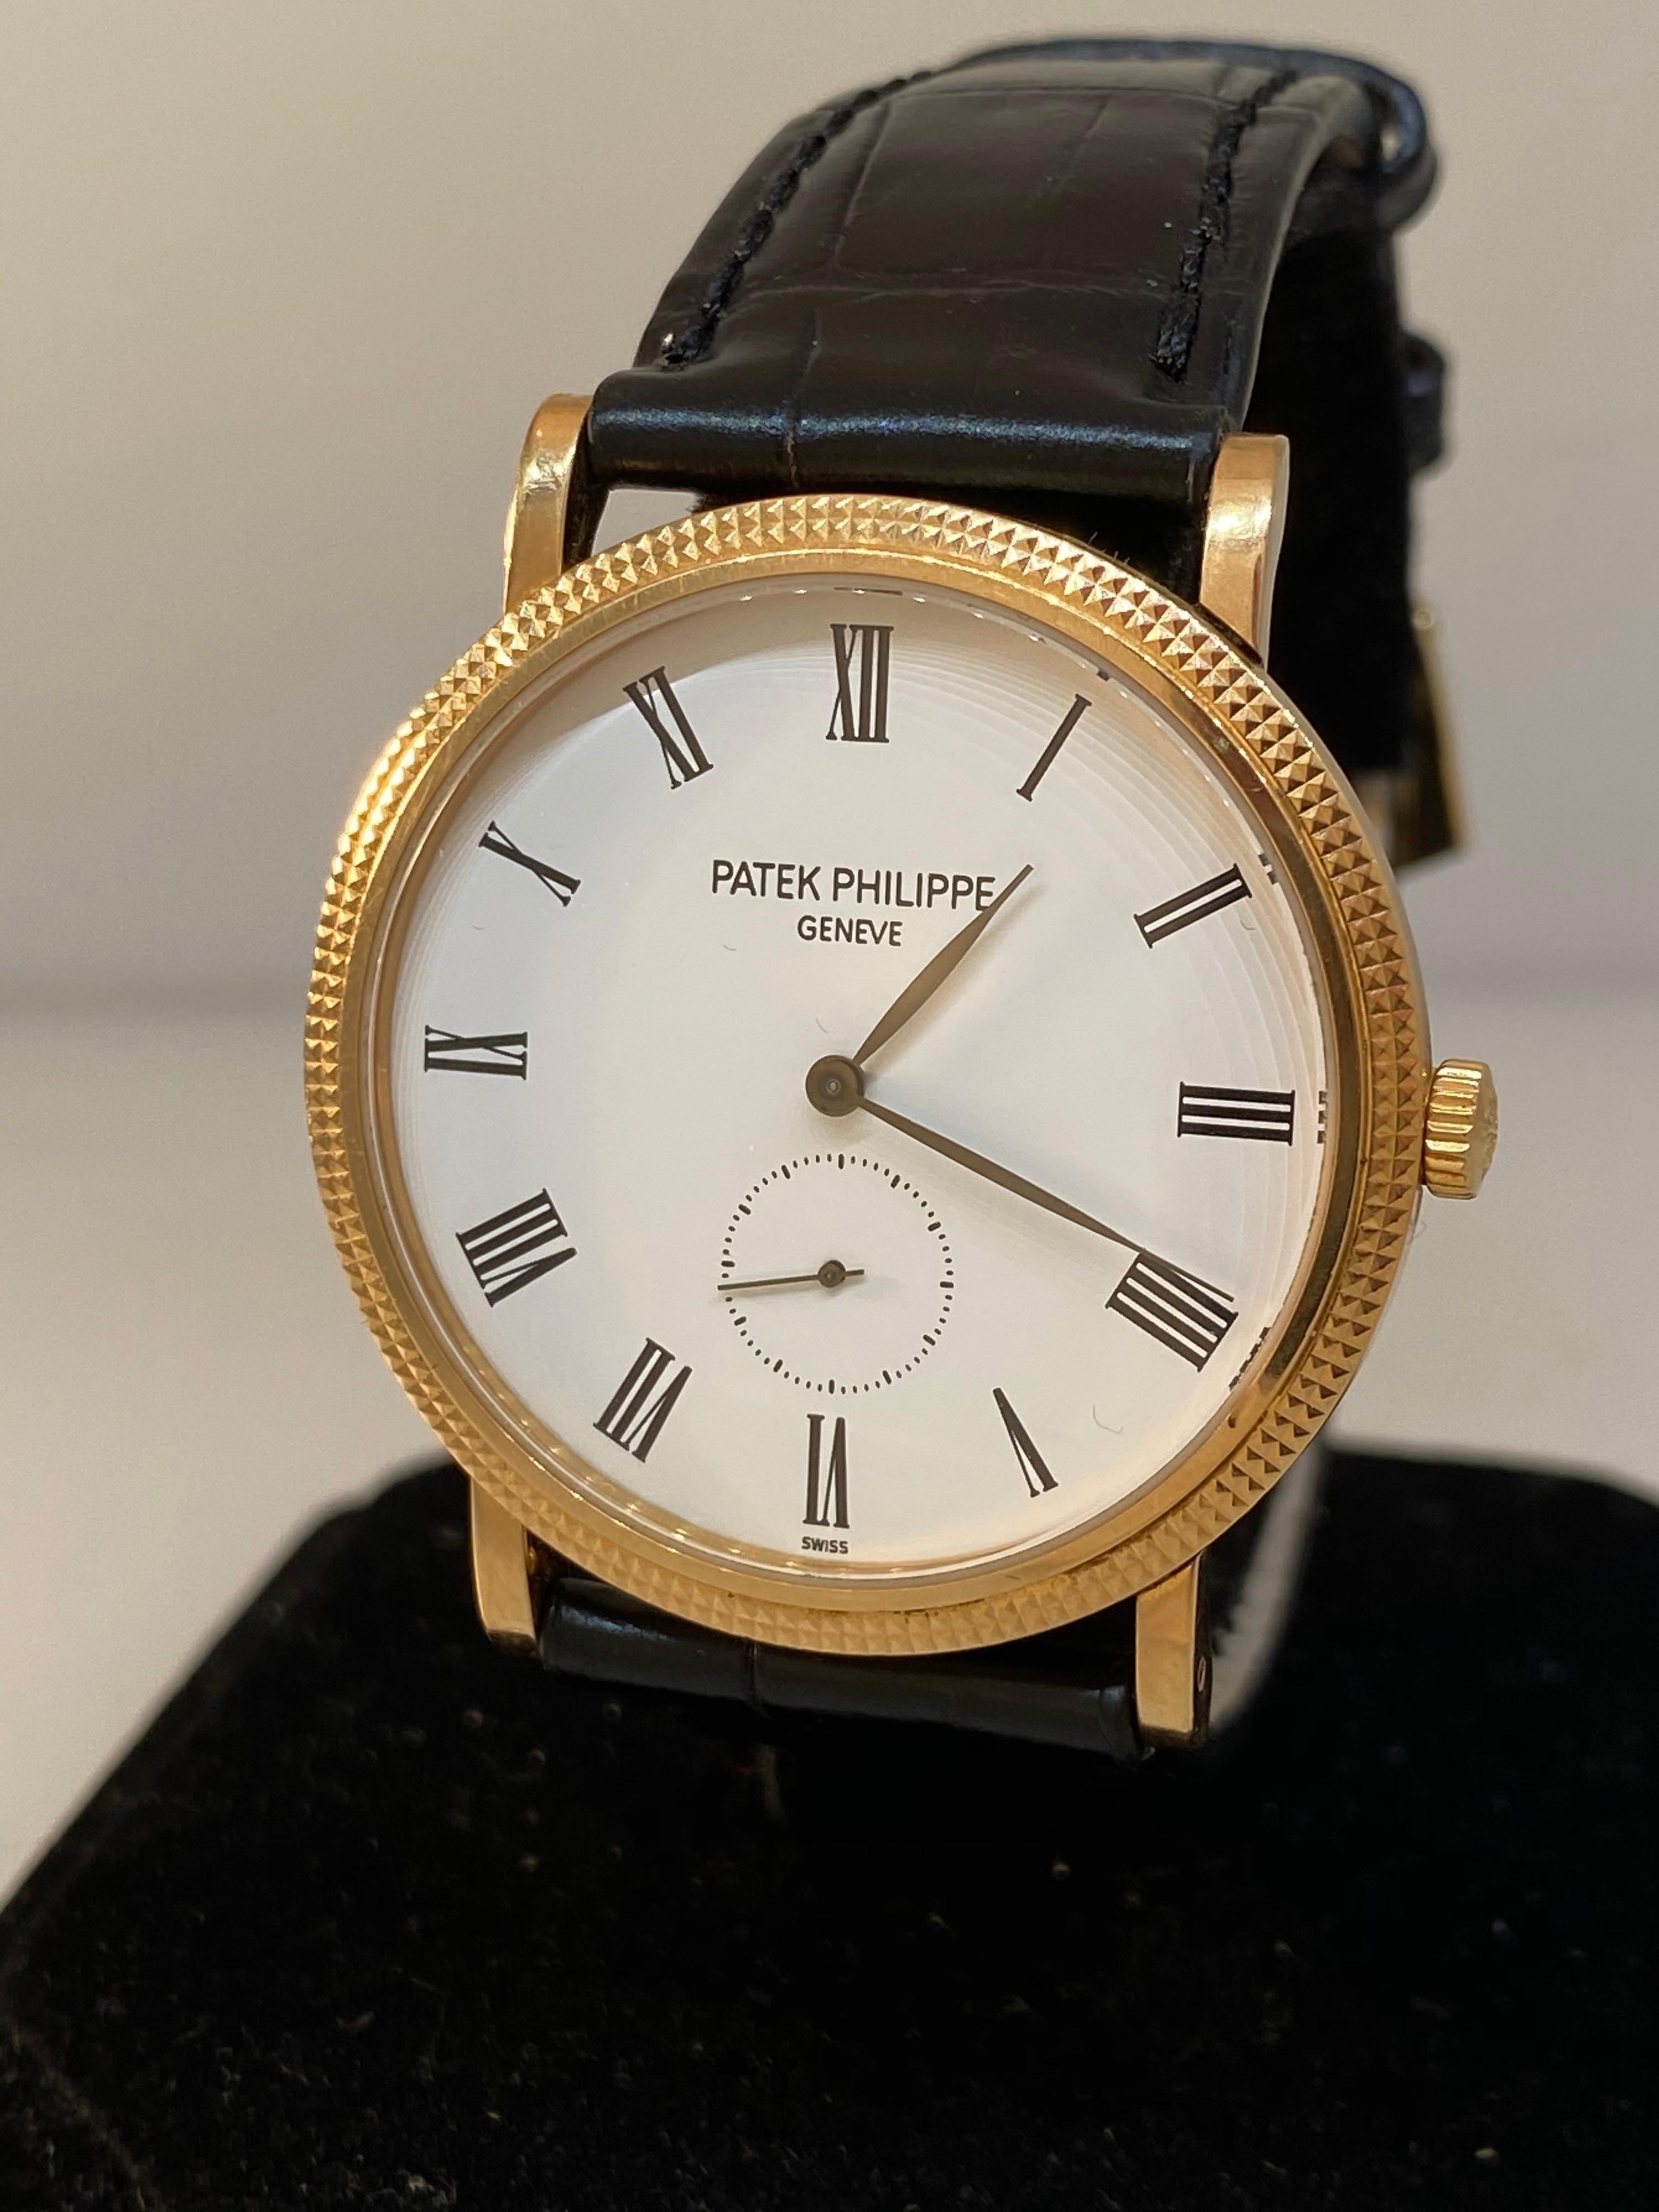 Patek Philippe Calatrava Men's Watch

Model Number: 5119R

100% Authentic

Pre-Owned in Excellent Condition

Comes with original Patek Philippe papers and generic watch box

18 Karat Rose Gold Case

Scratch Resistant Sapphire Crystal

White